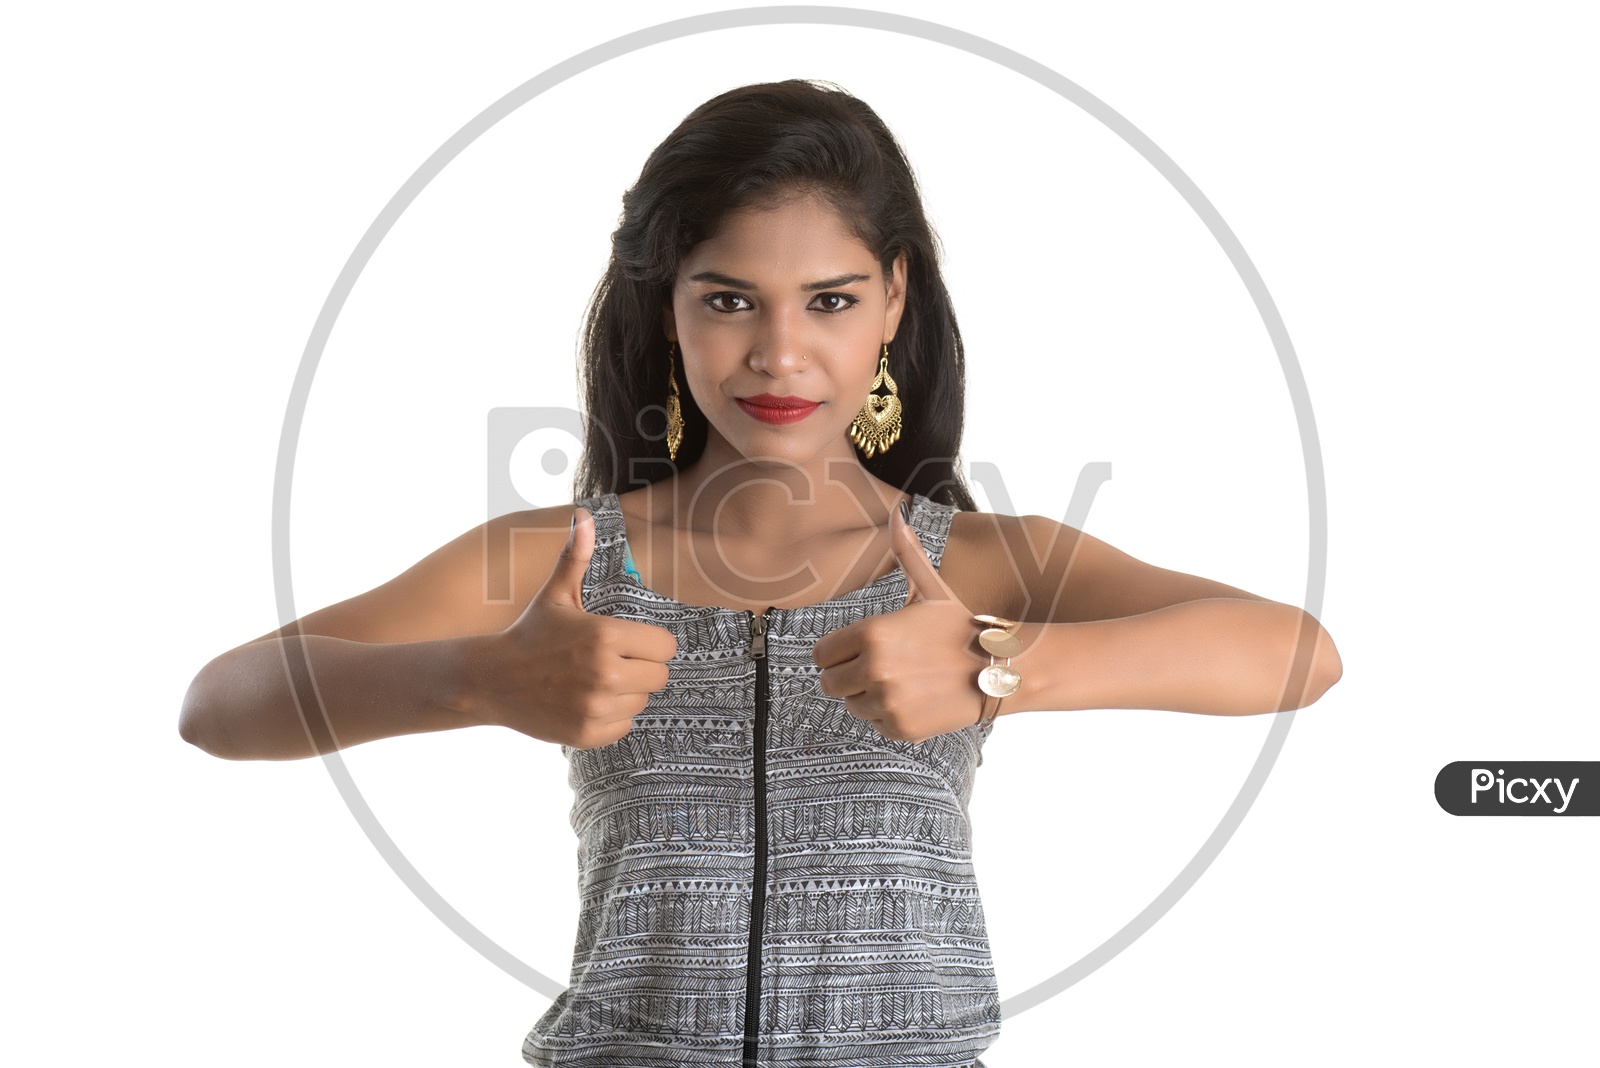 Pretty Young Girl  Showing Gestures and With Happy Smile On Face  Posing On an Isolated White Background